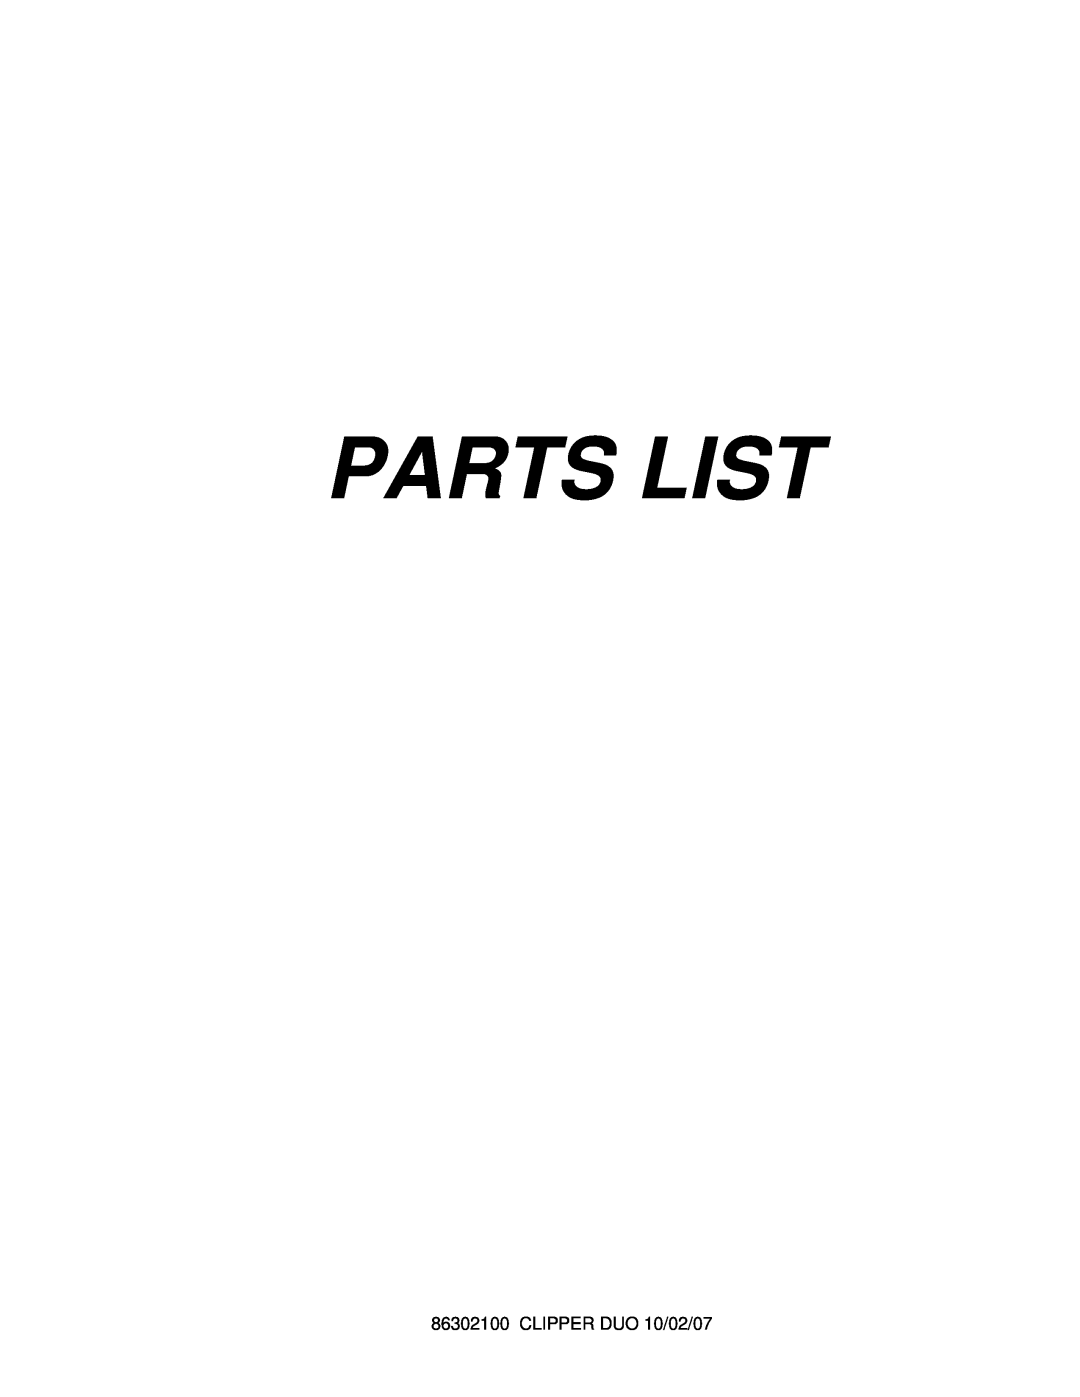 Windsor 10080480 operating instructions Parts List, CLIPPER DUO 10/02/07 